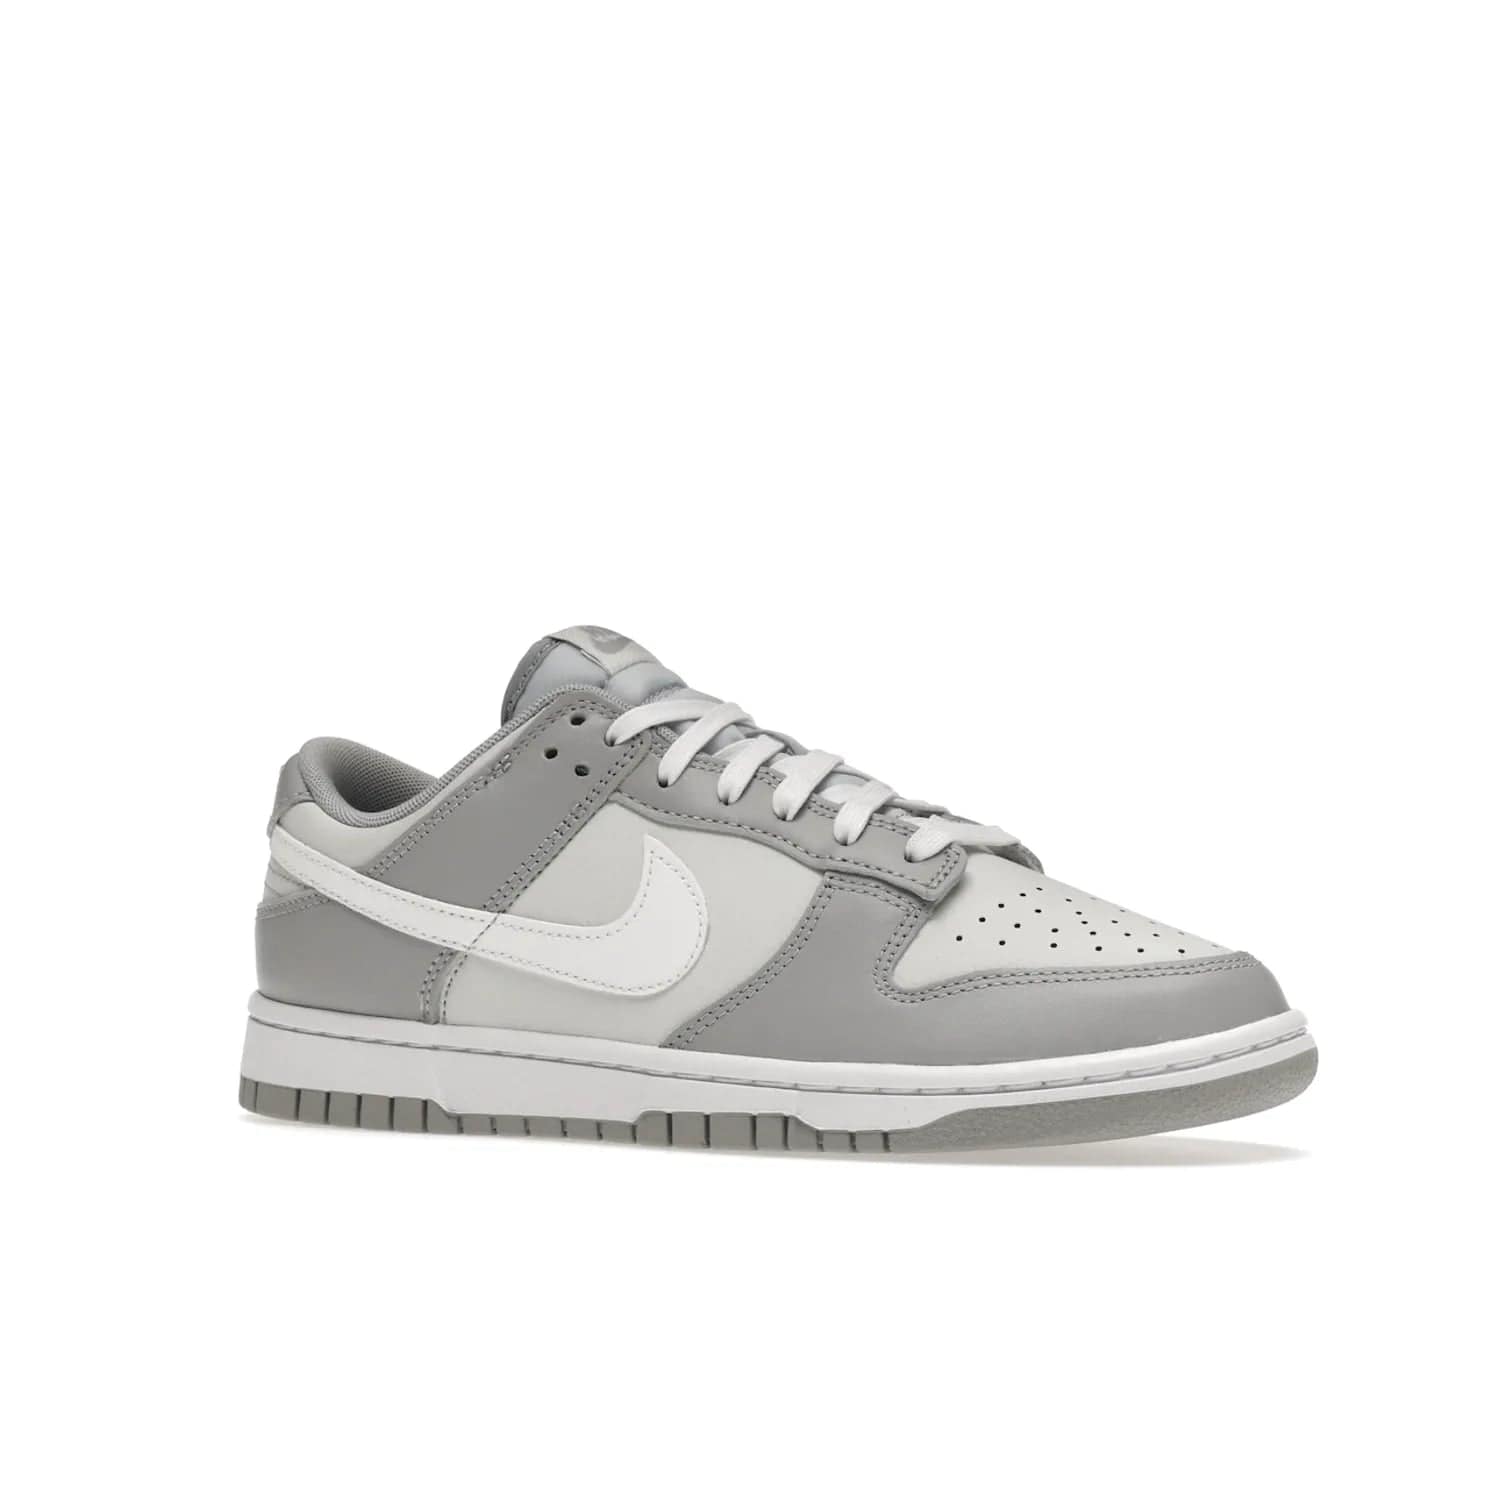 Nike Dunk Low Two Tone Grey - Image 4 - Only at www.BallersClubKickz.com - Fresh Nike Dunk Low Two Tone Grey leather/overlay Sneaker. White Swoosh detailing, nylon tongue, woven label and Air Sole. Get yours and stay on the trend.